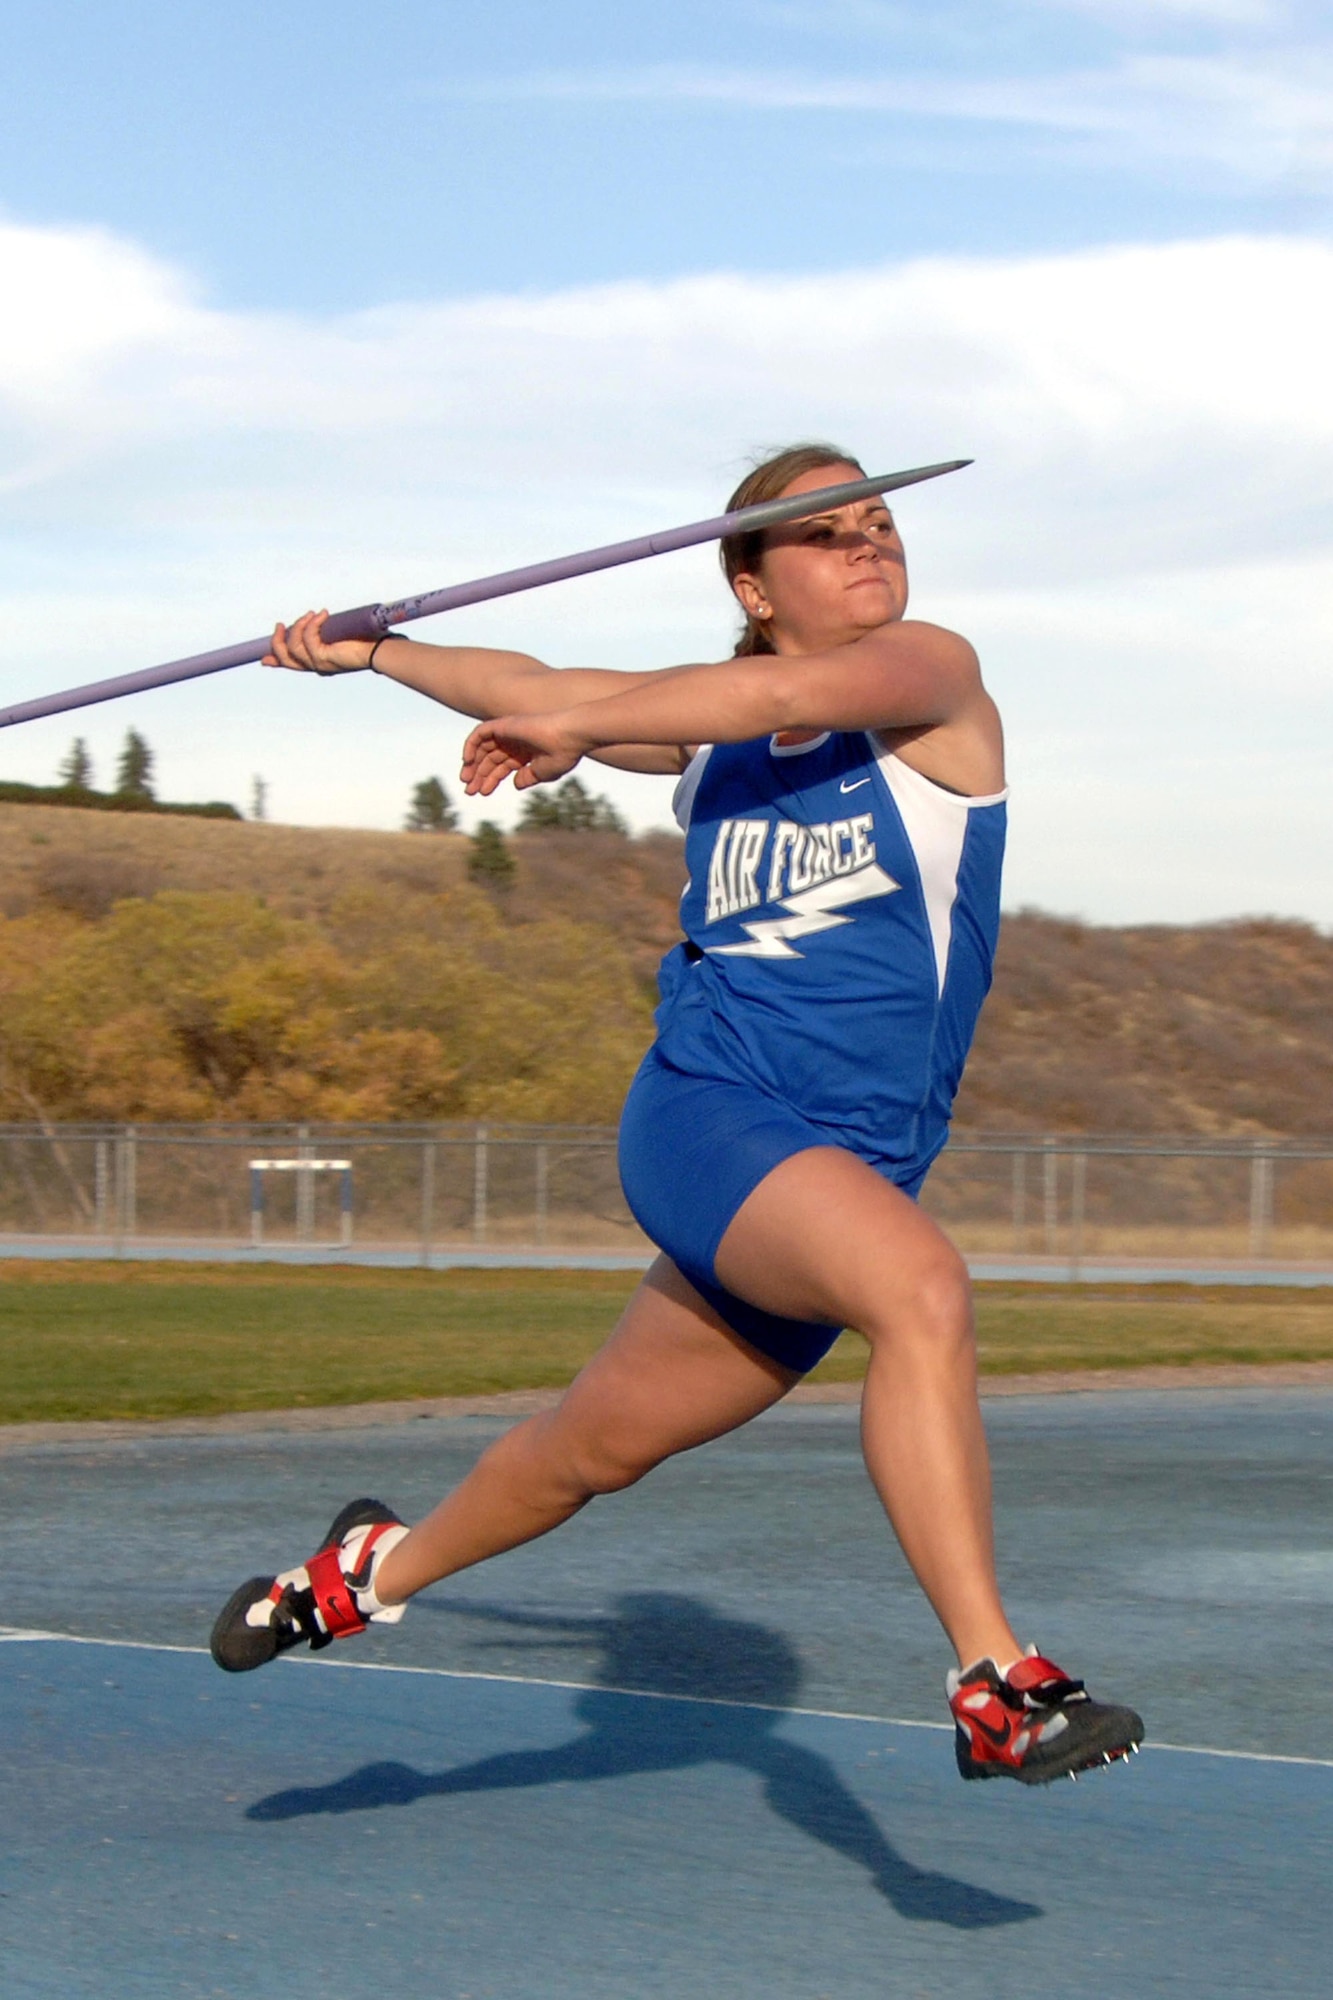 Dana Pounds, a 2006 graduate of the U.S. Air Force Academy, was named the Female Field Event Athlete of the Year for the Mountain Region by the U.S. Track and Field and Cross Country Coaches Association June 1. (U.S. Air Force photo/Danny Meyer)
